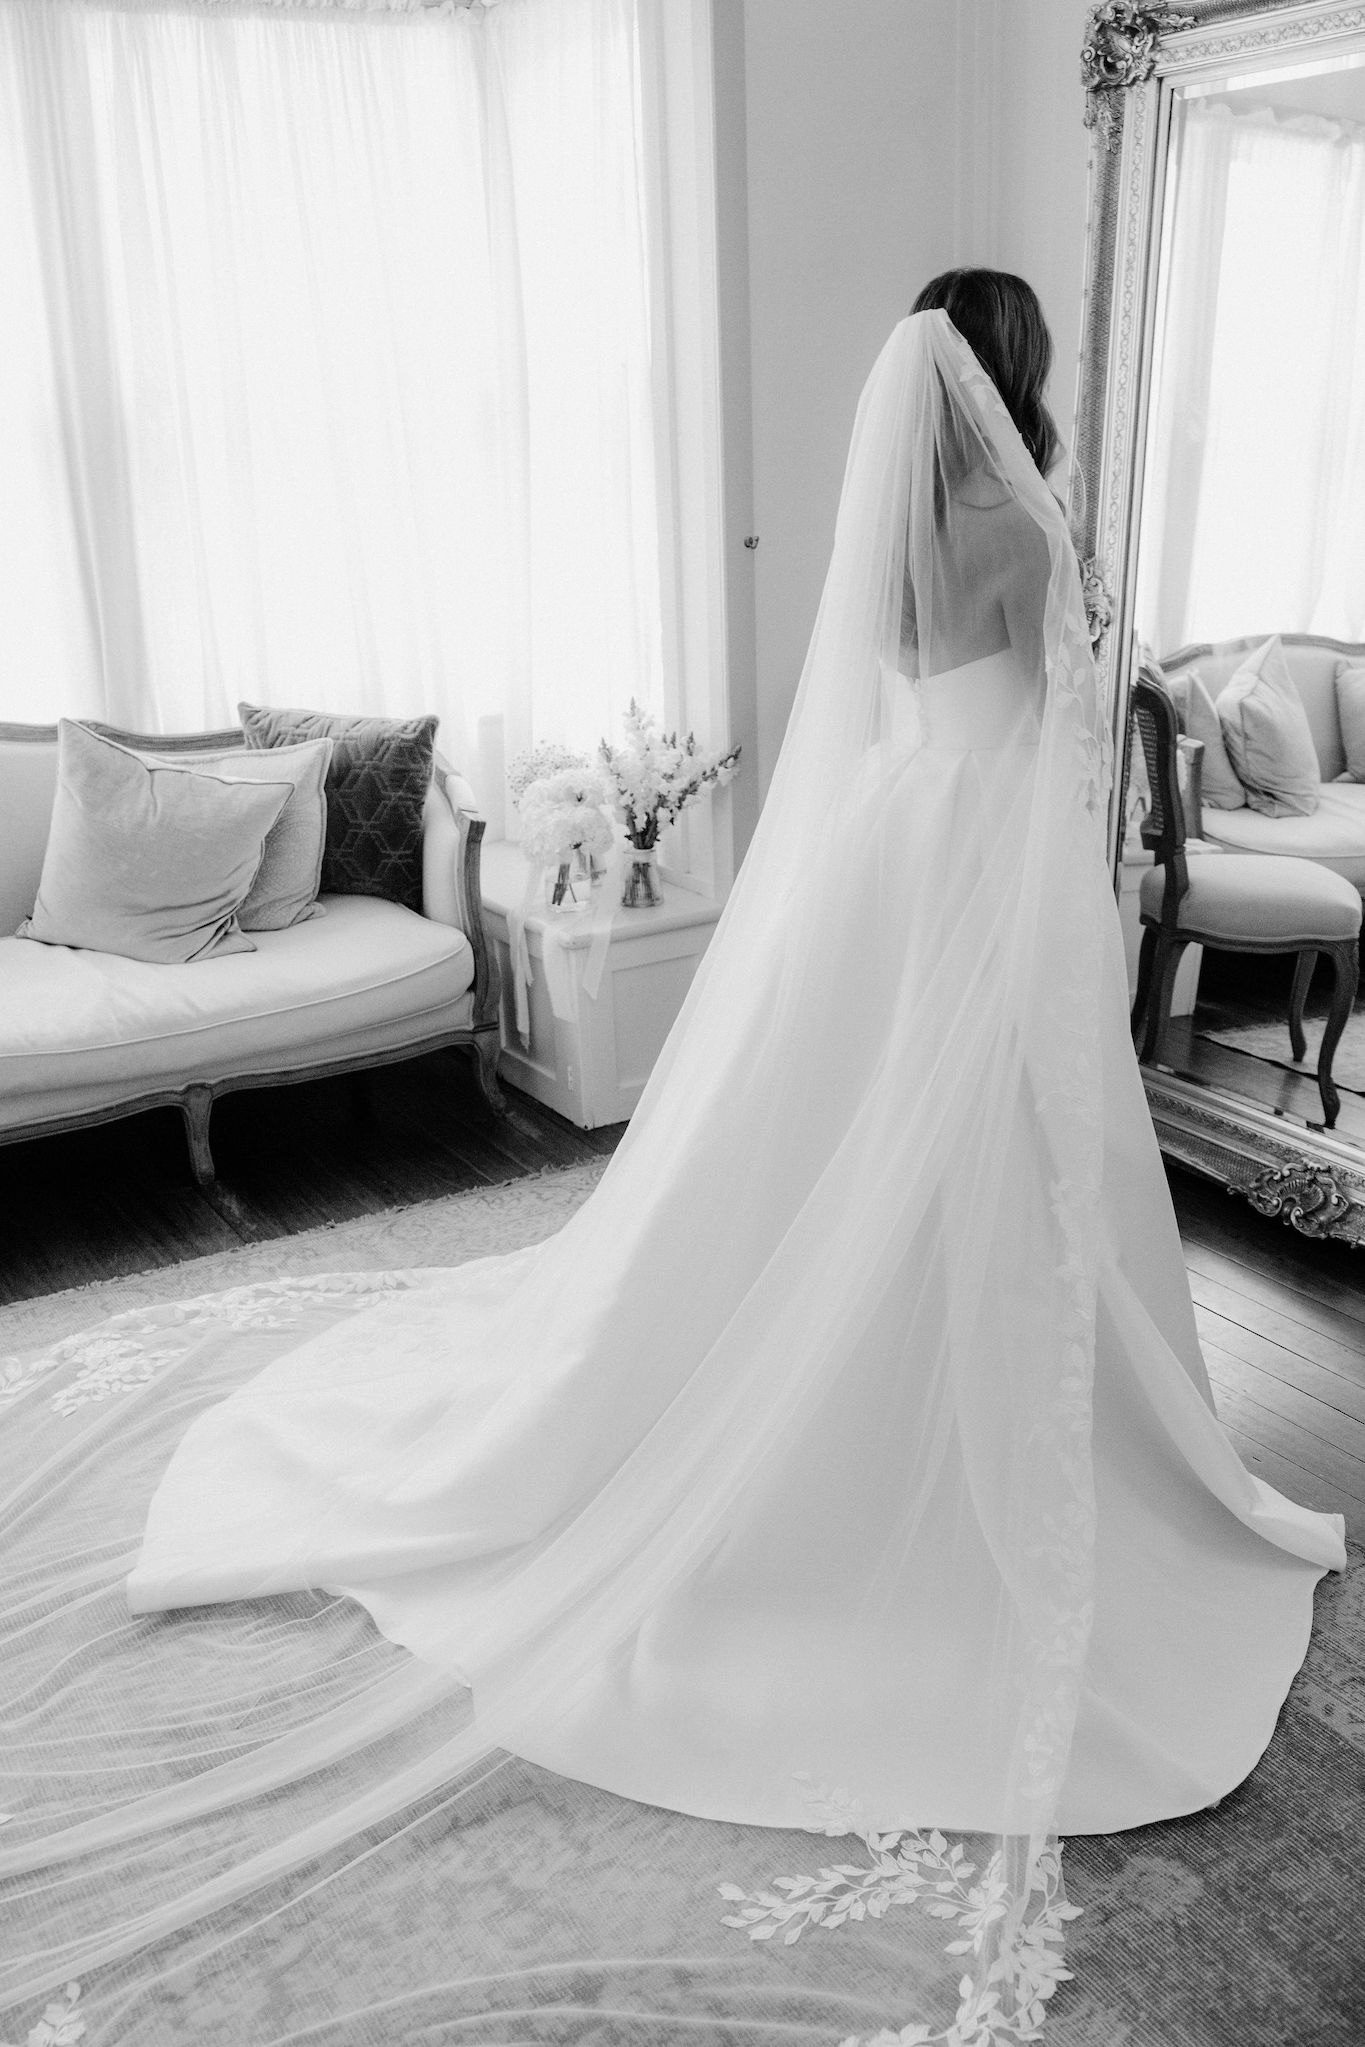 Bride standing in front of mirror with wedding dress and veil